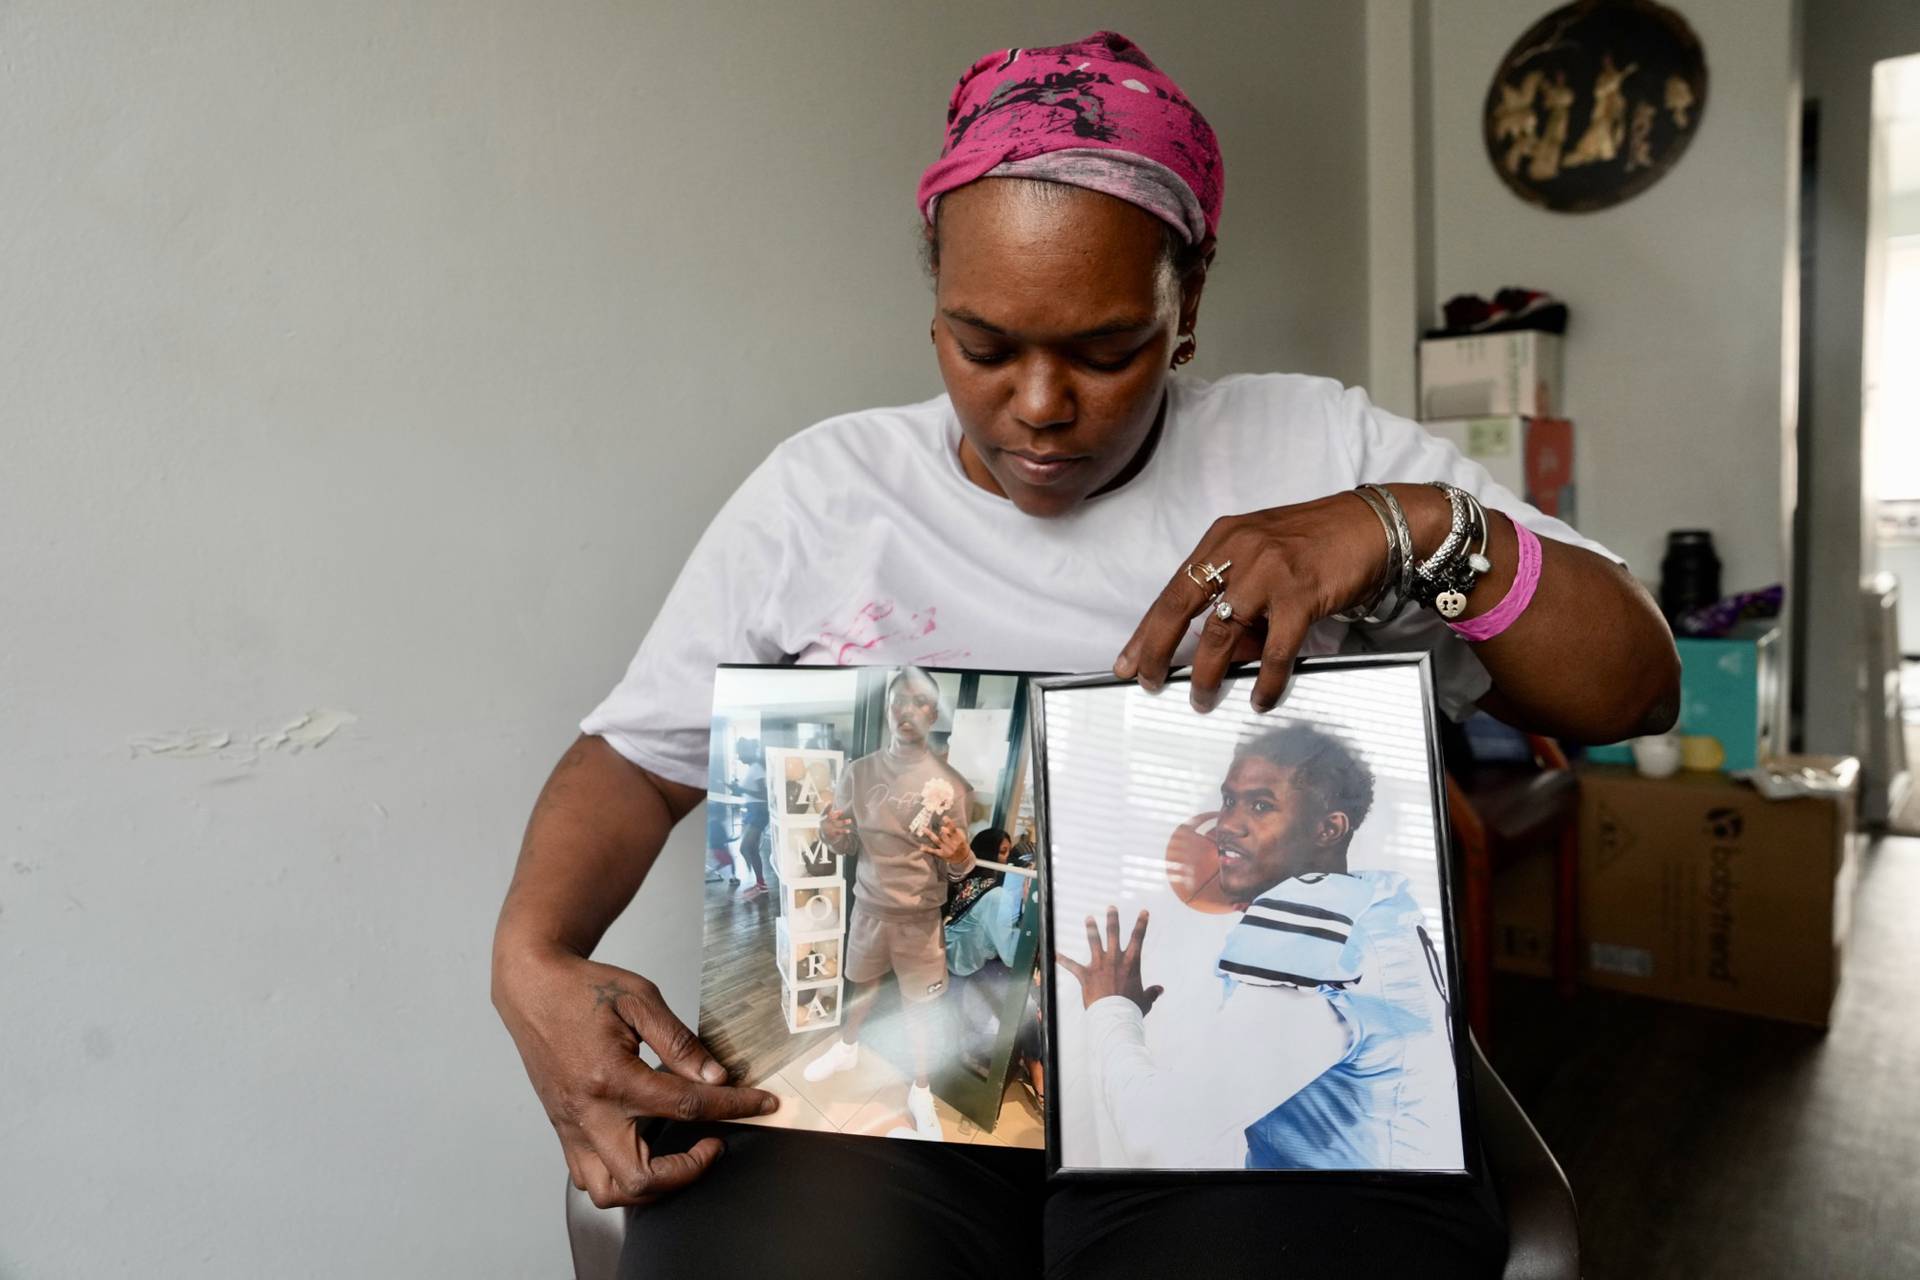 Shantera Ebanks, mother of K’Mauri Ebanks, holds up photos of him in her home on June 6, 2023. She still wears the pink “trauma” hospital bracelet from when he was admitted to Shock Trauma.